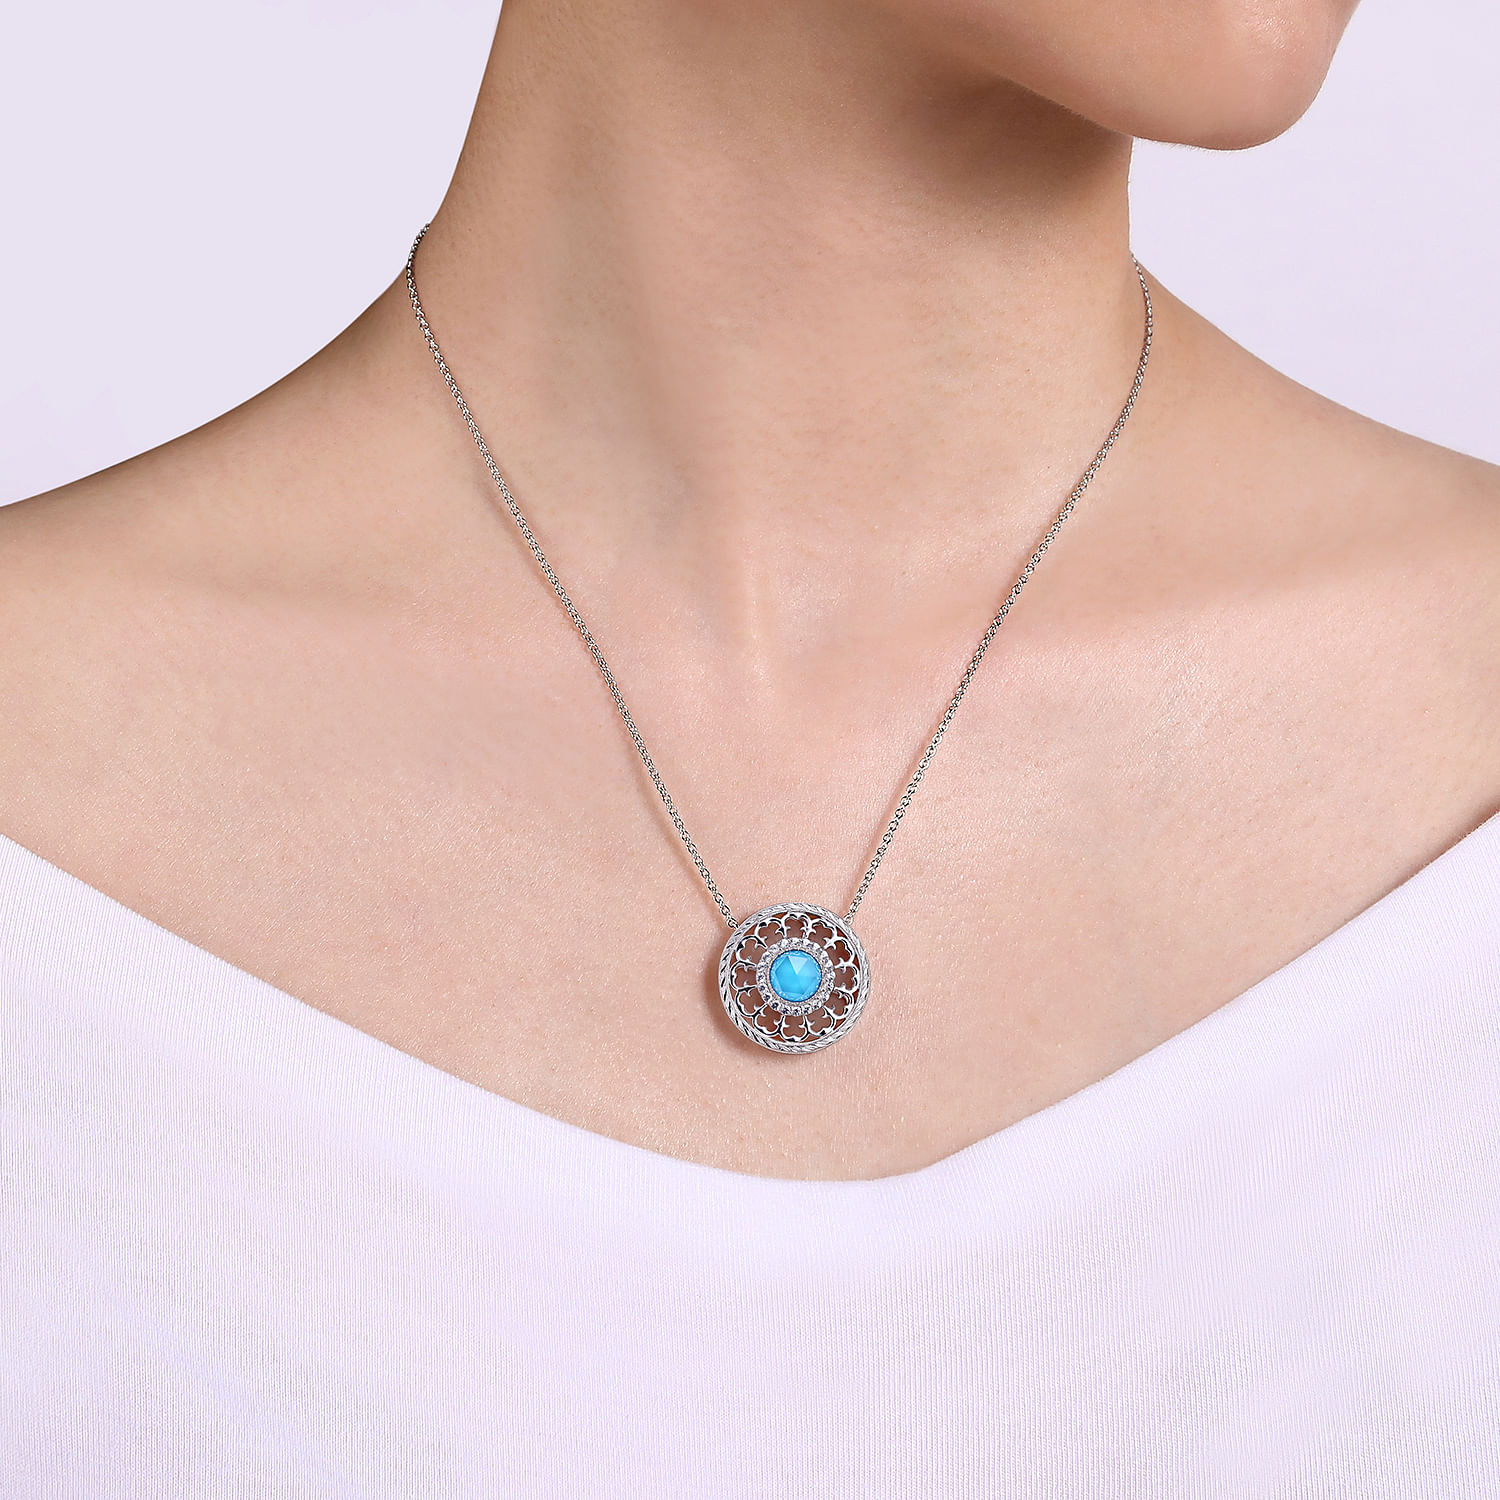 18 inch 925 Sterling Silver Round Rock Crystal and Turquoise Pendant Necklace with White Sapphire Halo